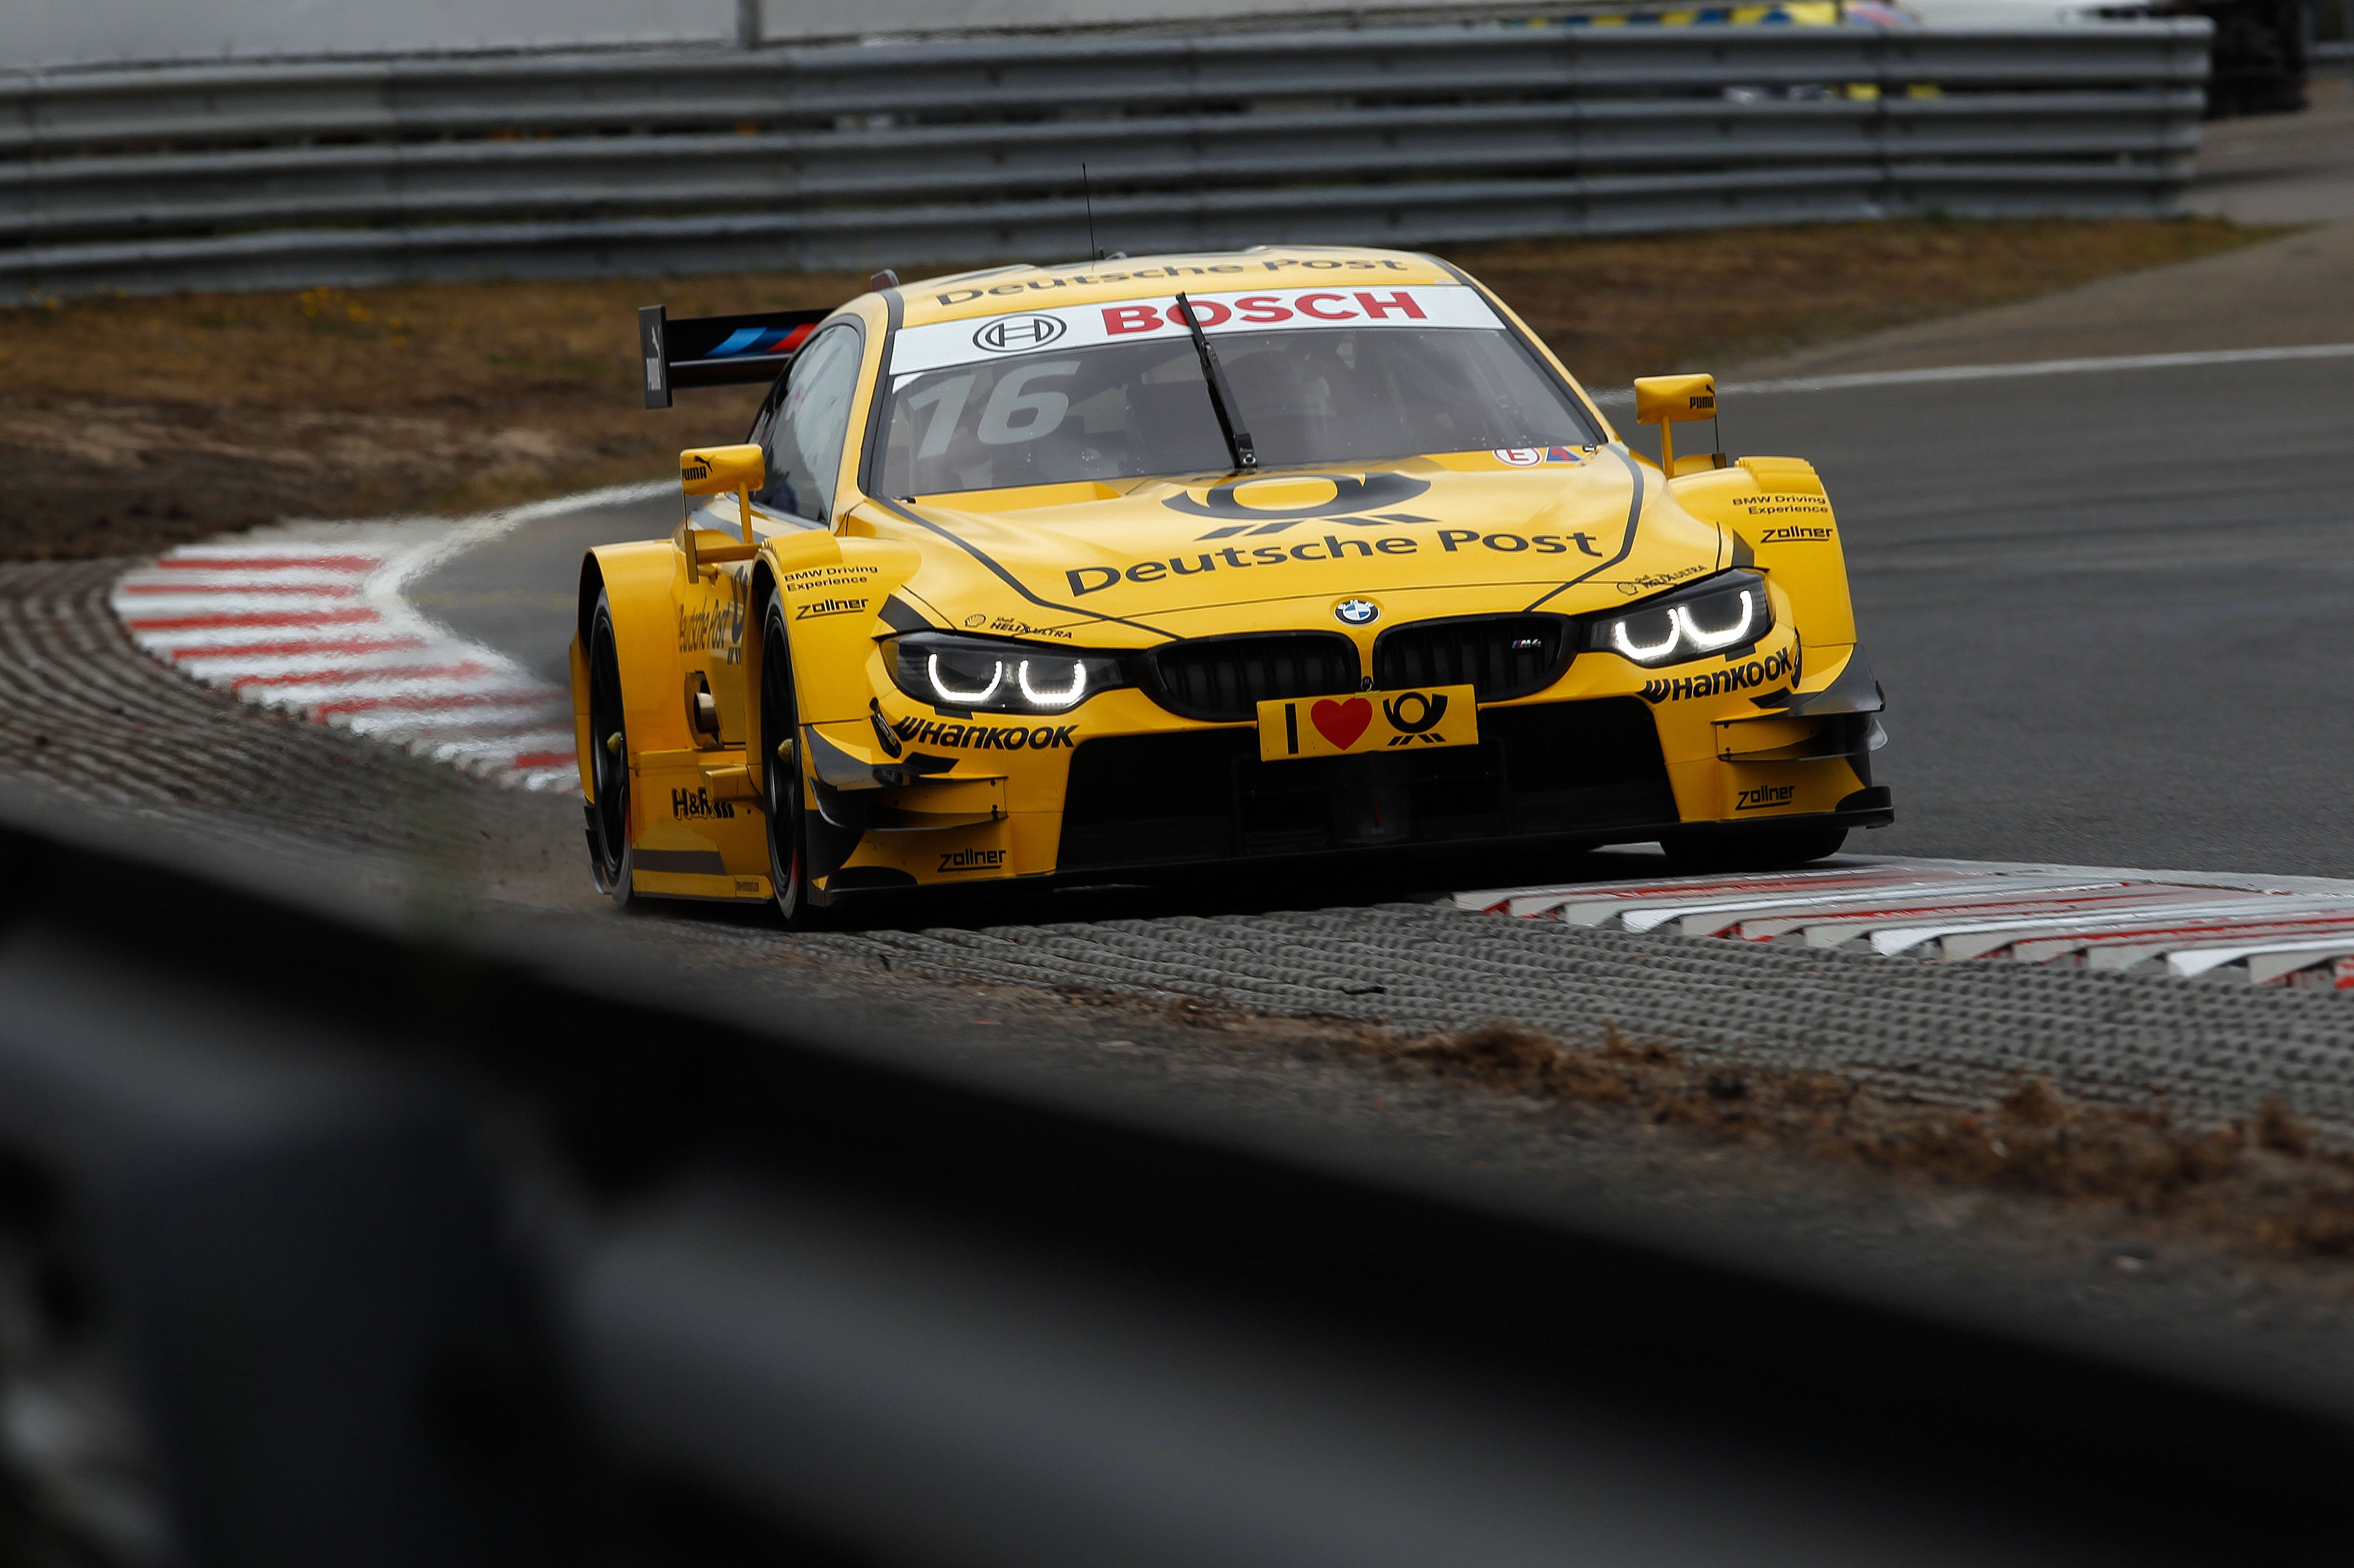 Zandvoort (NL) 12th July 2015. BMW Motorsport, Timo Glock (DE) DEUTSCHE POST BMW M4 DTM. This image is copyright free for editorial use © BMW AG (07/2015).